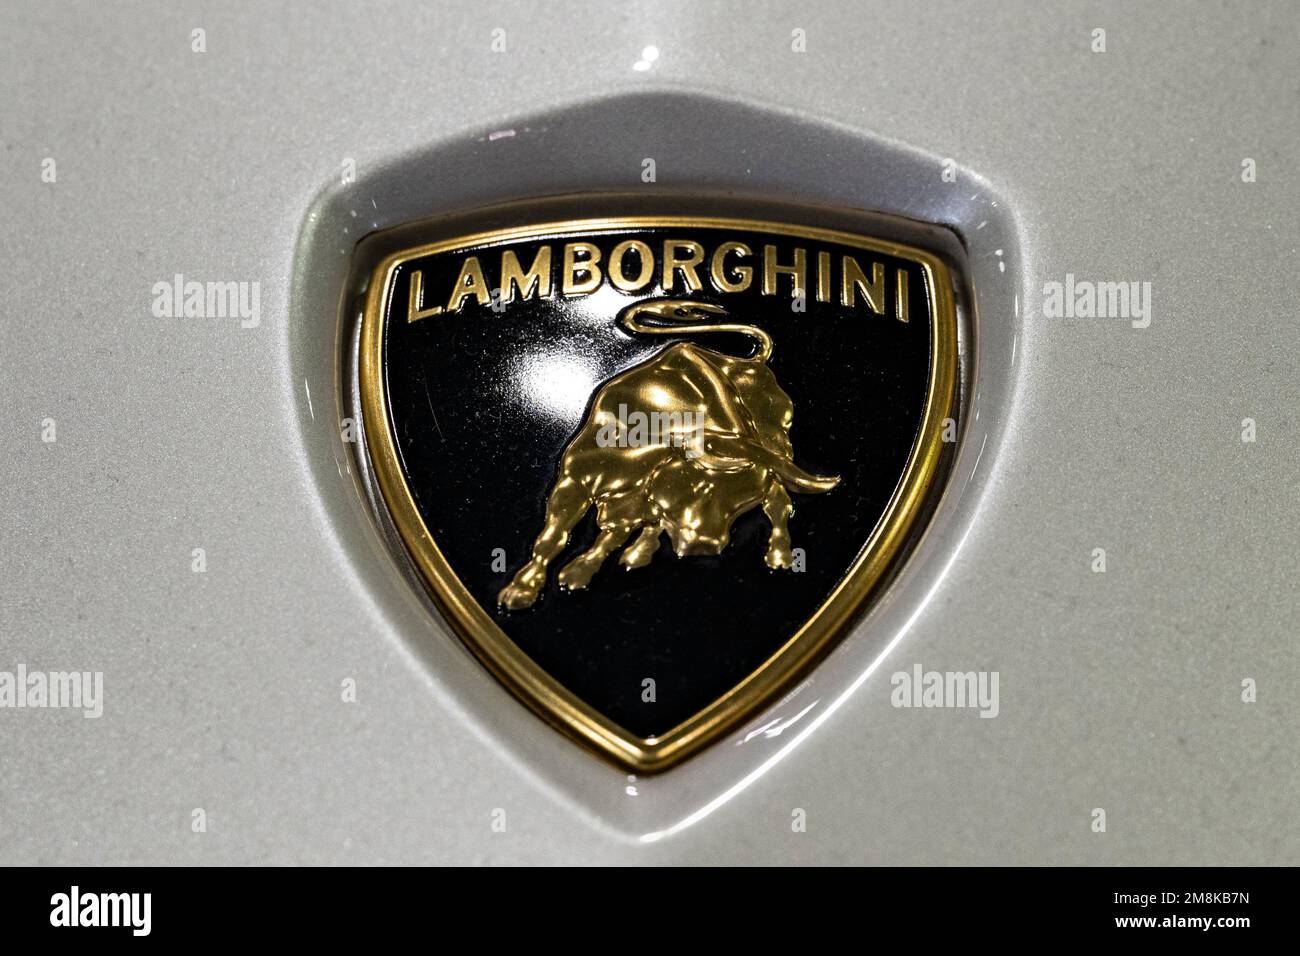 Chiba, Chiba Prefecture, Japan. 13th Jan, 2023. A Lamborghini badge on the hood of a supercar at the Tokyo Auto Salon.Lamborghini is an Italian luxury sports car manufacturer known for its sleek designs, powerful engines, and advanced technology. The company was founded in 1963 by Ferruccio Lamborghini and is now a subsidiary of the Volkswagen Group. Lamborghini's most famous models include the Miura, Countach, and Aventador.Tokyo Auto Salon (æ±äº¬ã‚ªãƒ¼ãƒˆã‚µãƒ-ãƒ³) is considered one of the most prestigious aftermarket car shows in the world, attracting car enthusiasts, manufacturers, Stock Photo